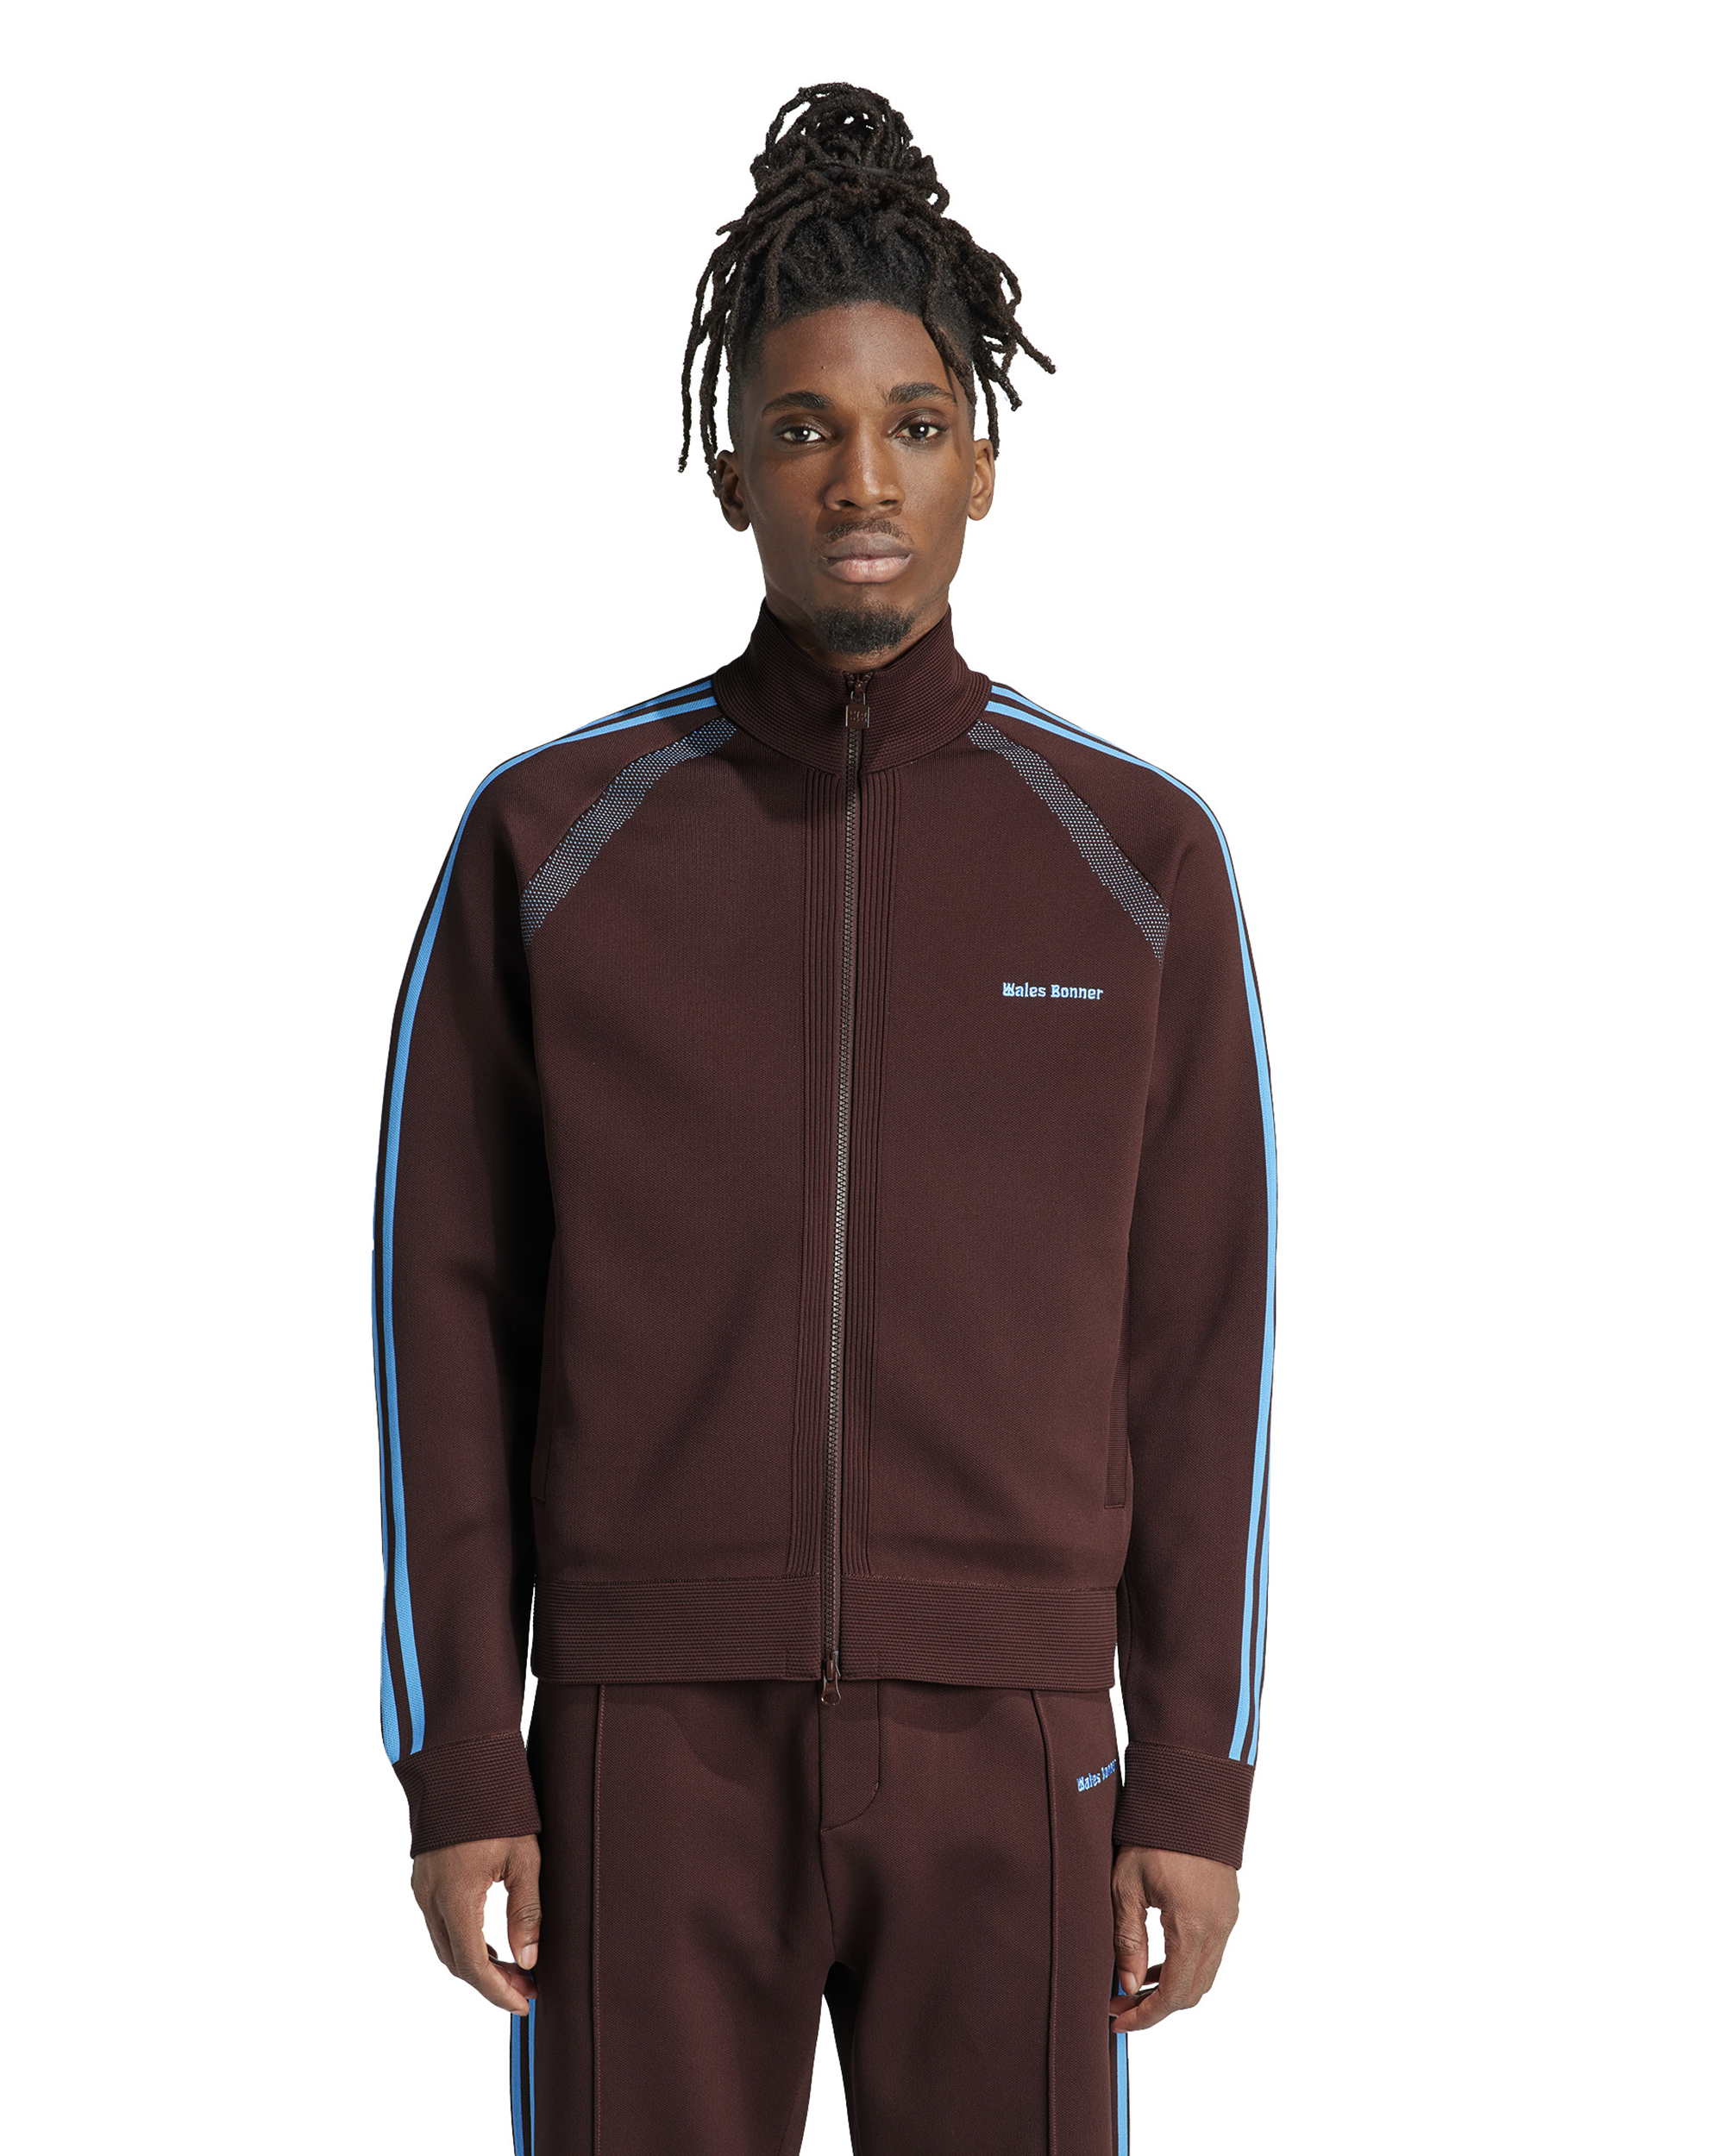 Wales Bonner Embroided Logo Track Jacket - Mystery Brown